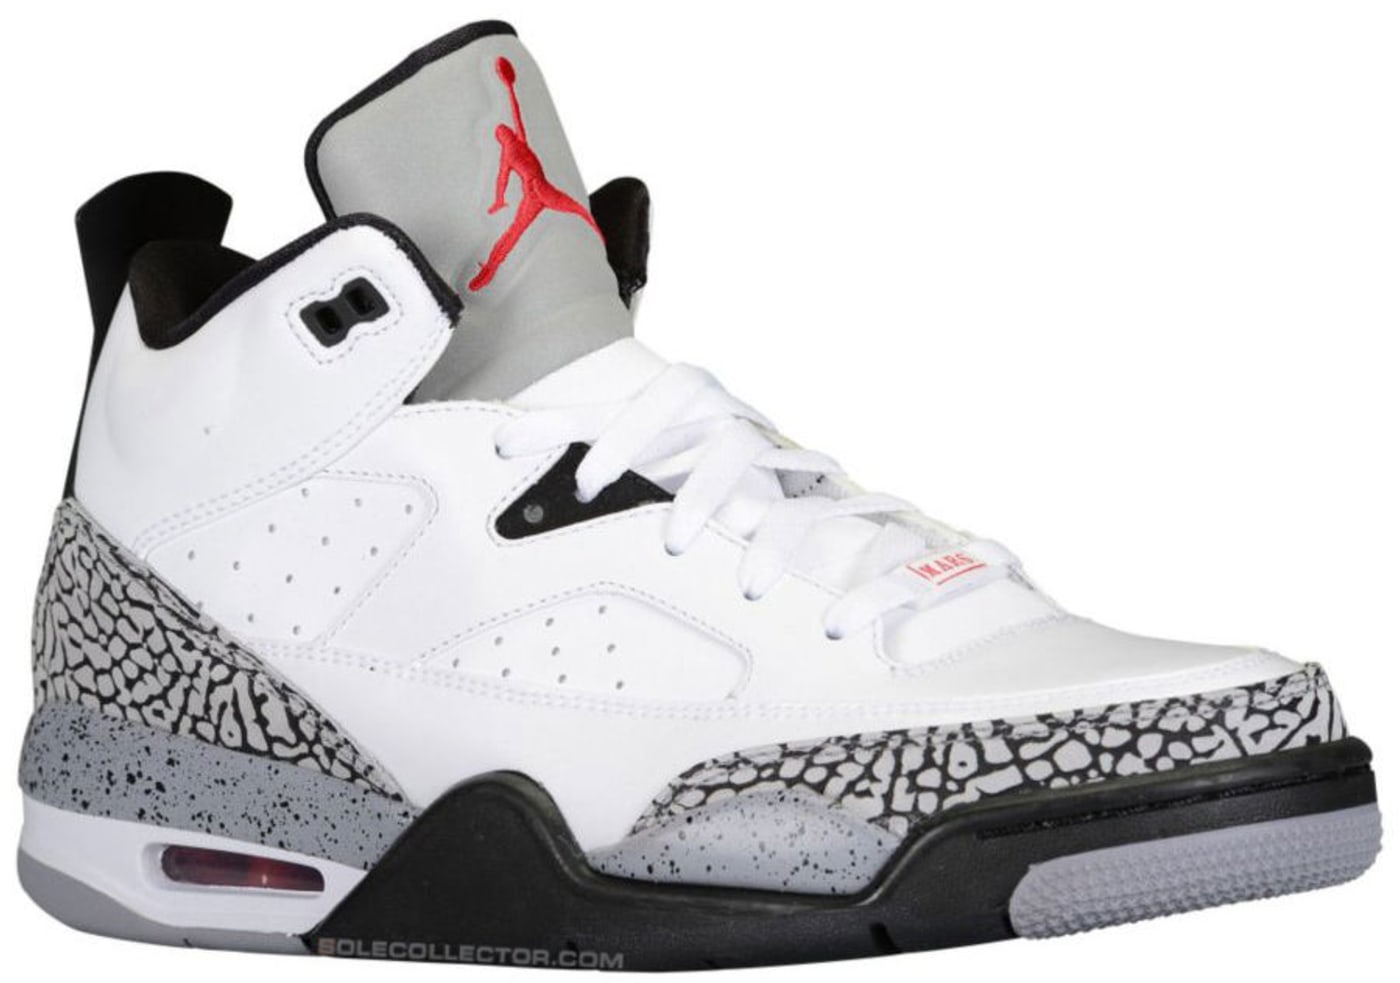 The Best-Selling Air Jordans of 2013 Complex